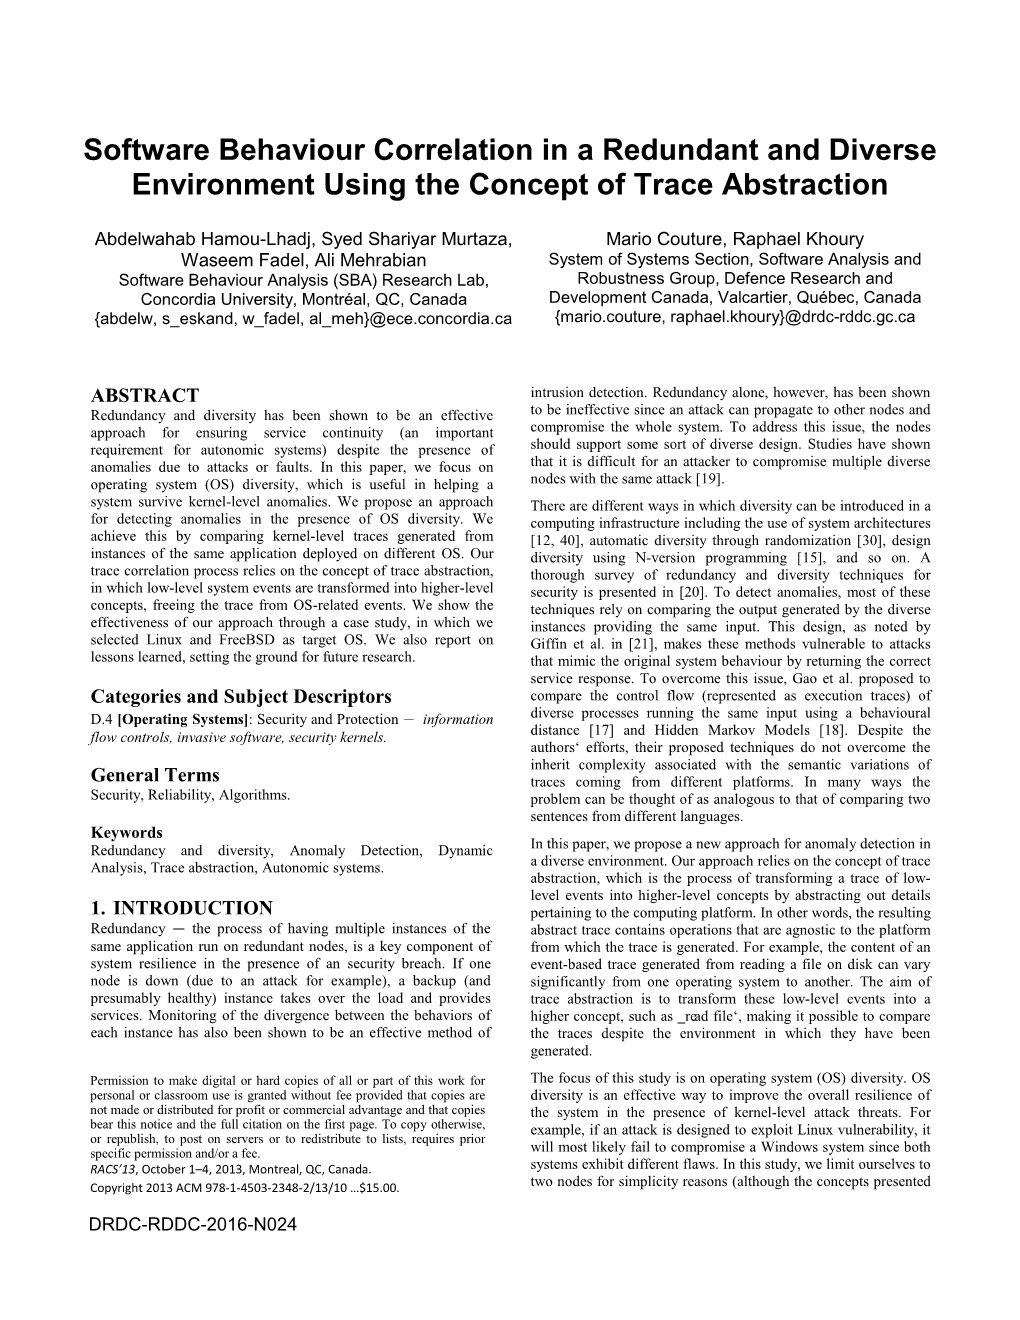 Software Behaviour Correlation in a Redundant and Diverse Environment Using the Concept of Trace Abstraction